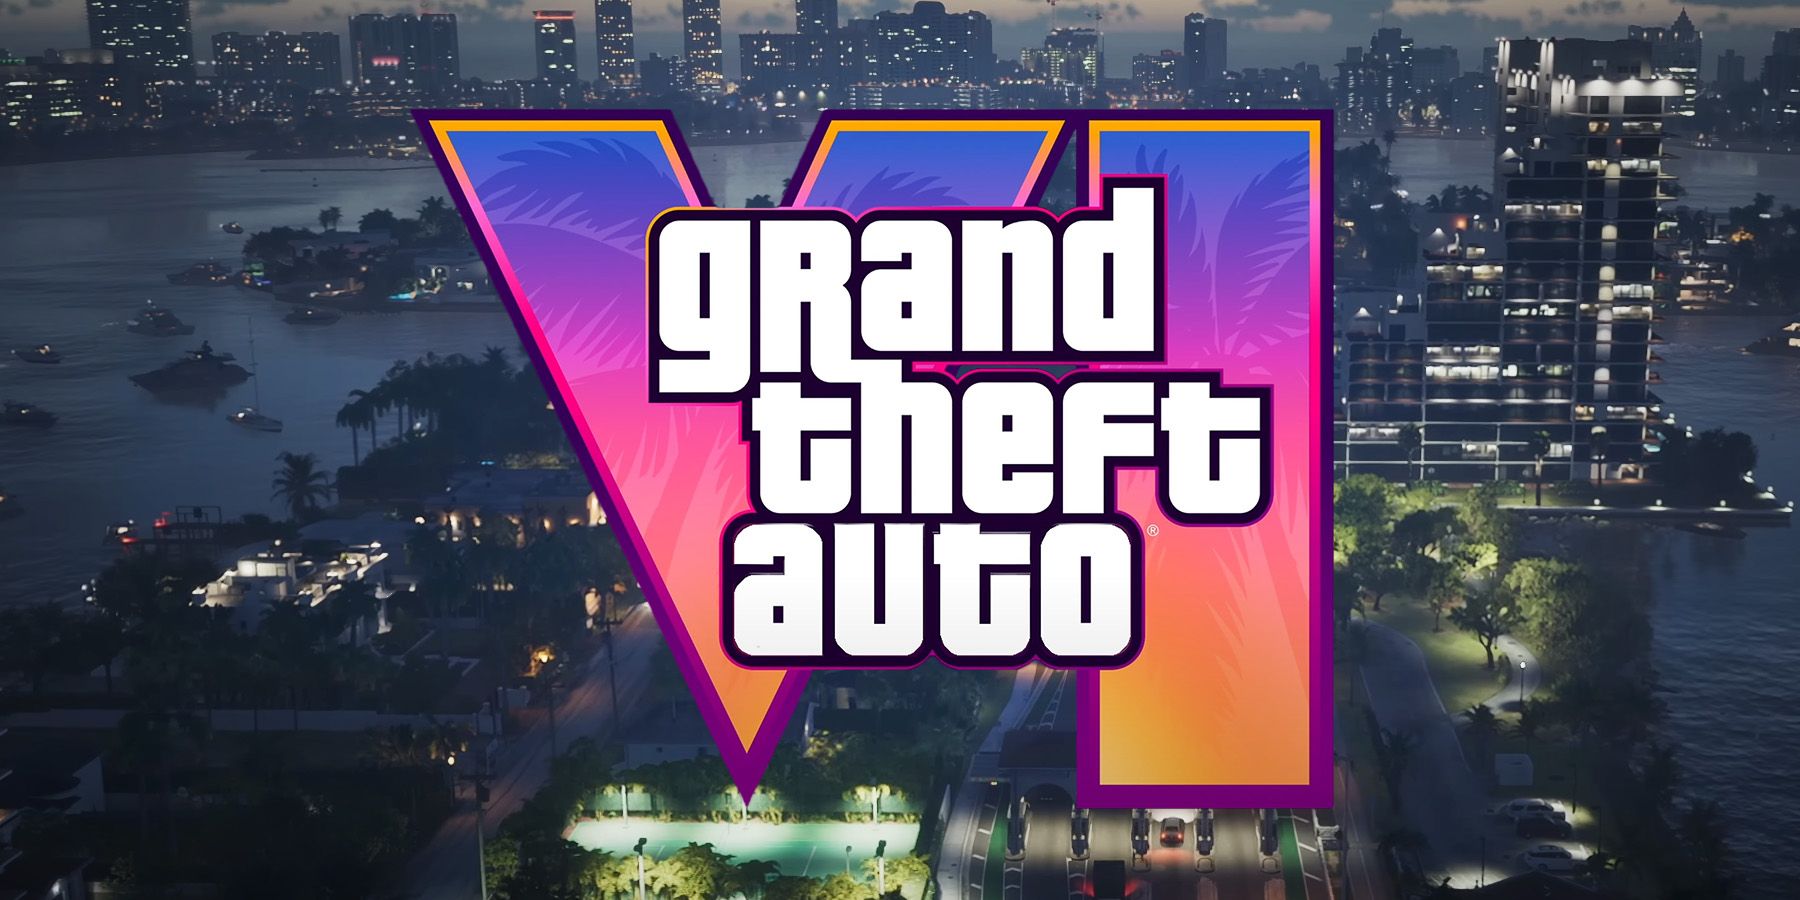 Grand Theft Auto 6 logo over Vice City aerial view screenshot from GTA 6 trailer 1